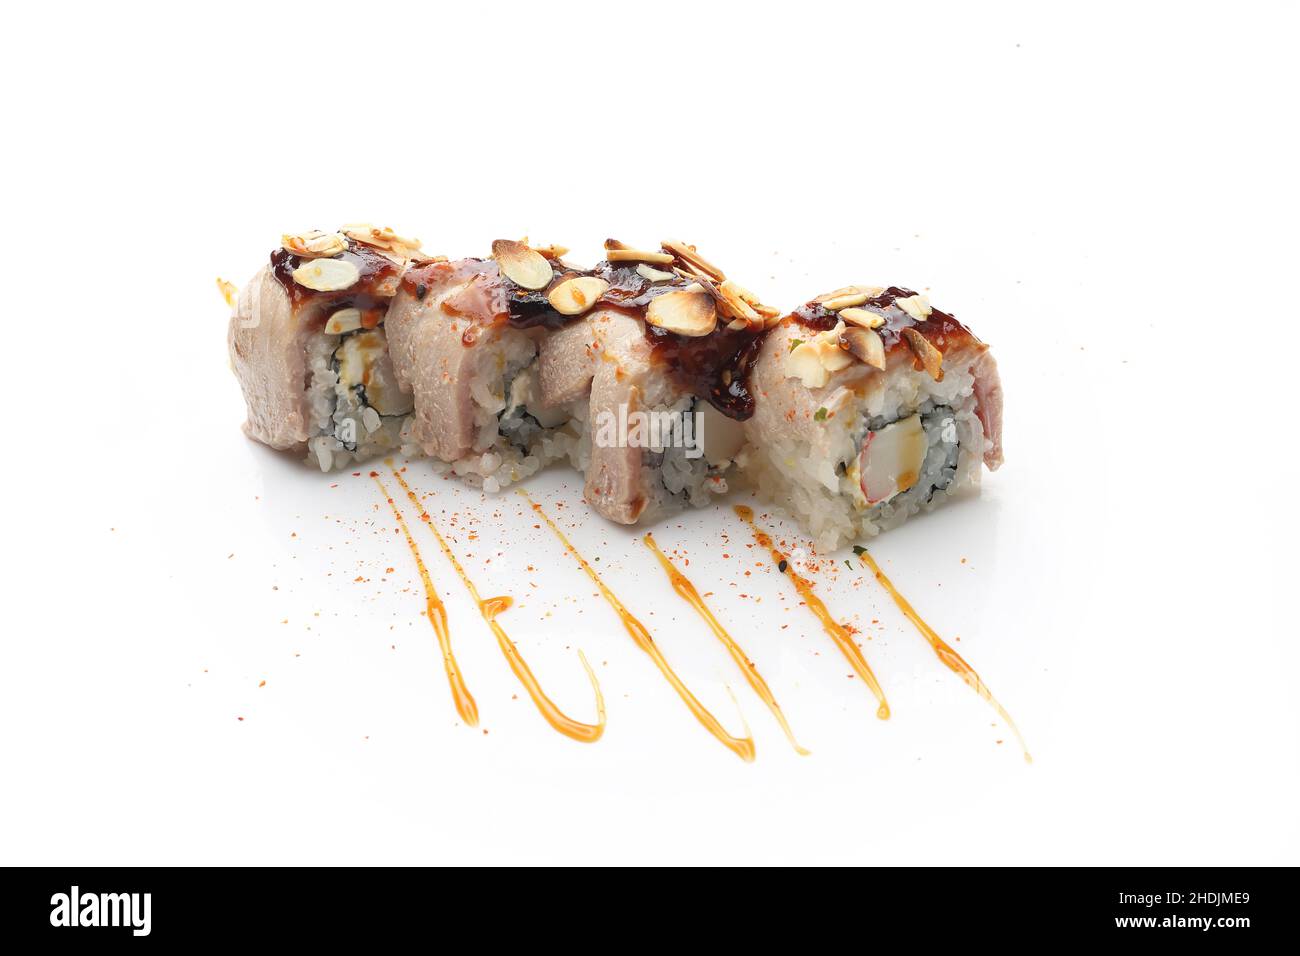 Sushi with salmon in tempura Traditional sushi rolls on a white background. Stock Photo